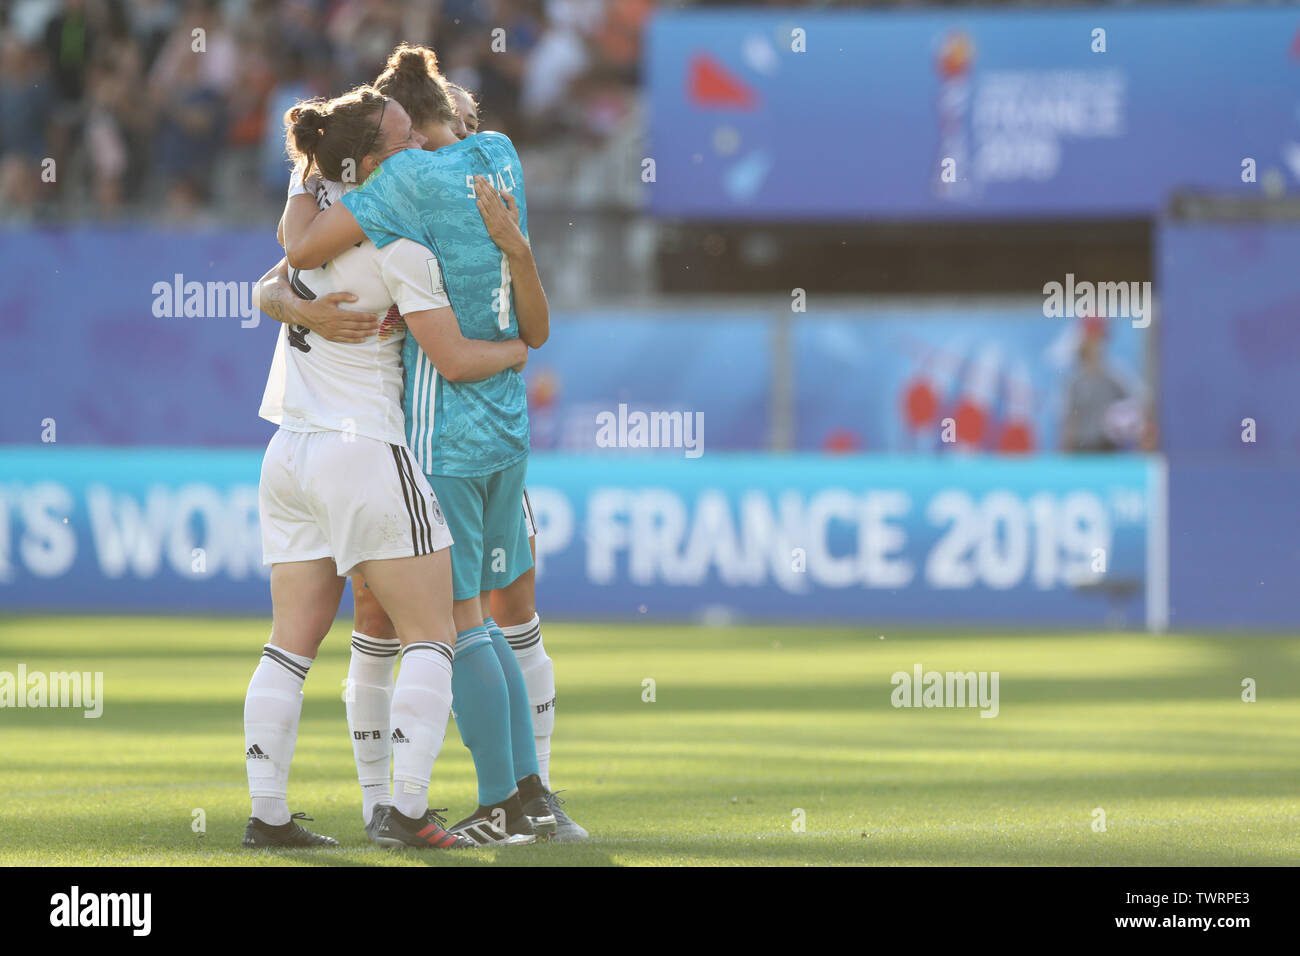 Grenoble, France. 22nd June, 2019. Goalkeeper Almuth Schult (R) of Germany hugs her teammates after the round of 16 match between Germany and Nigeria at the 2019 FIFA Women's World Cup at Stade des Alpes in Grenoble, France, June 22, 2019. Credit: Xu Zijian/Xinhua/Alamy Live News Stock Photo